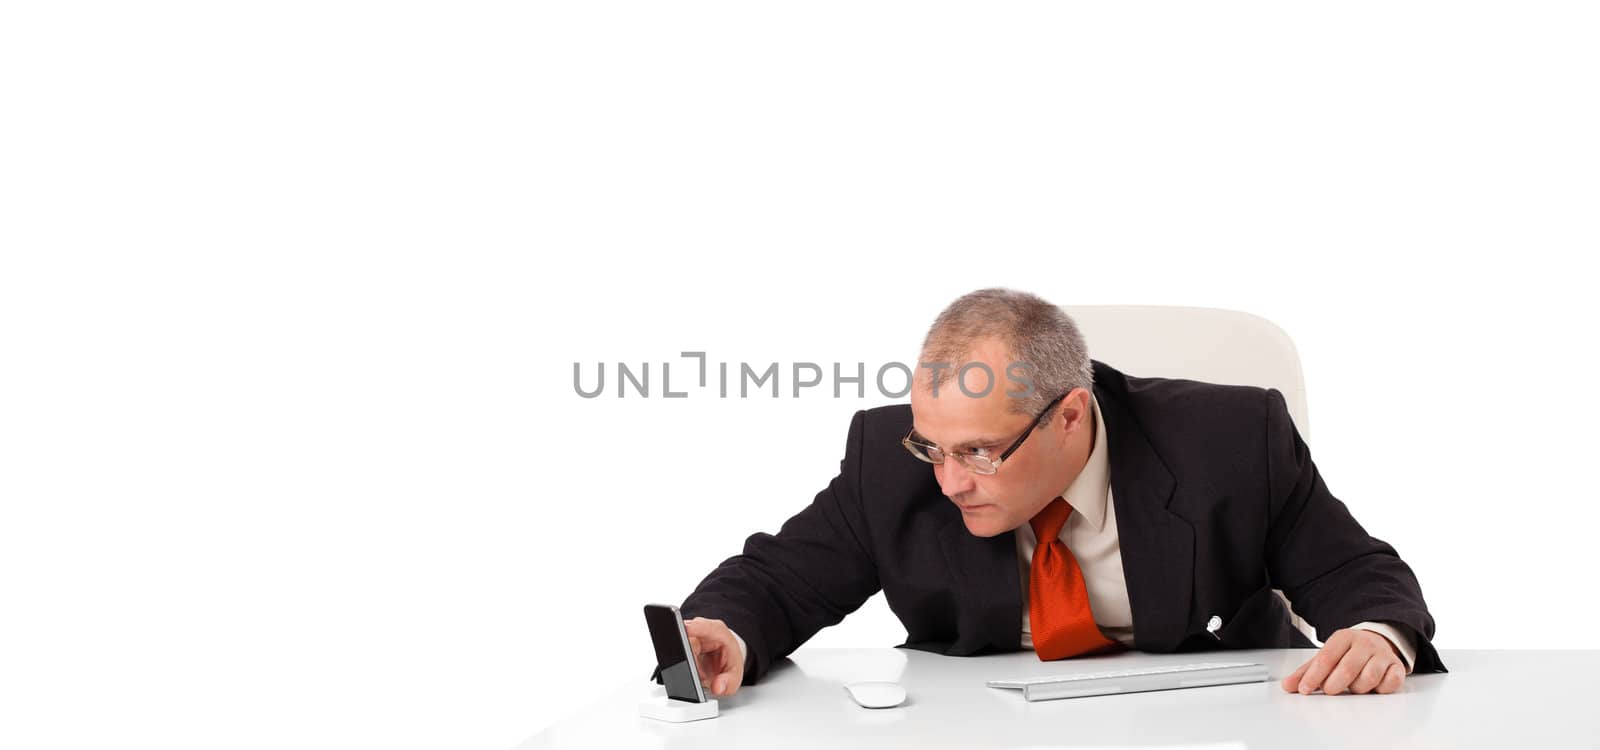 businessman sitting at desk and holding a mobilephone with copys pace, isolated on white